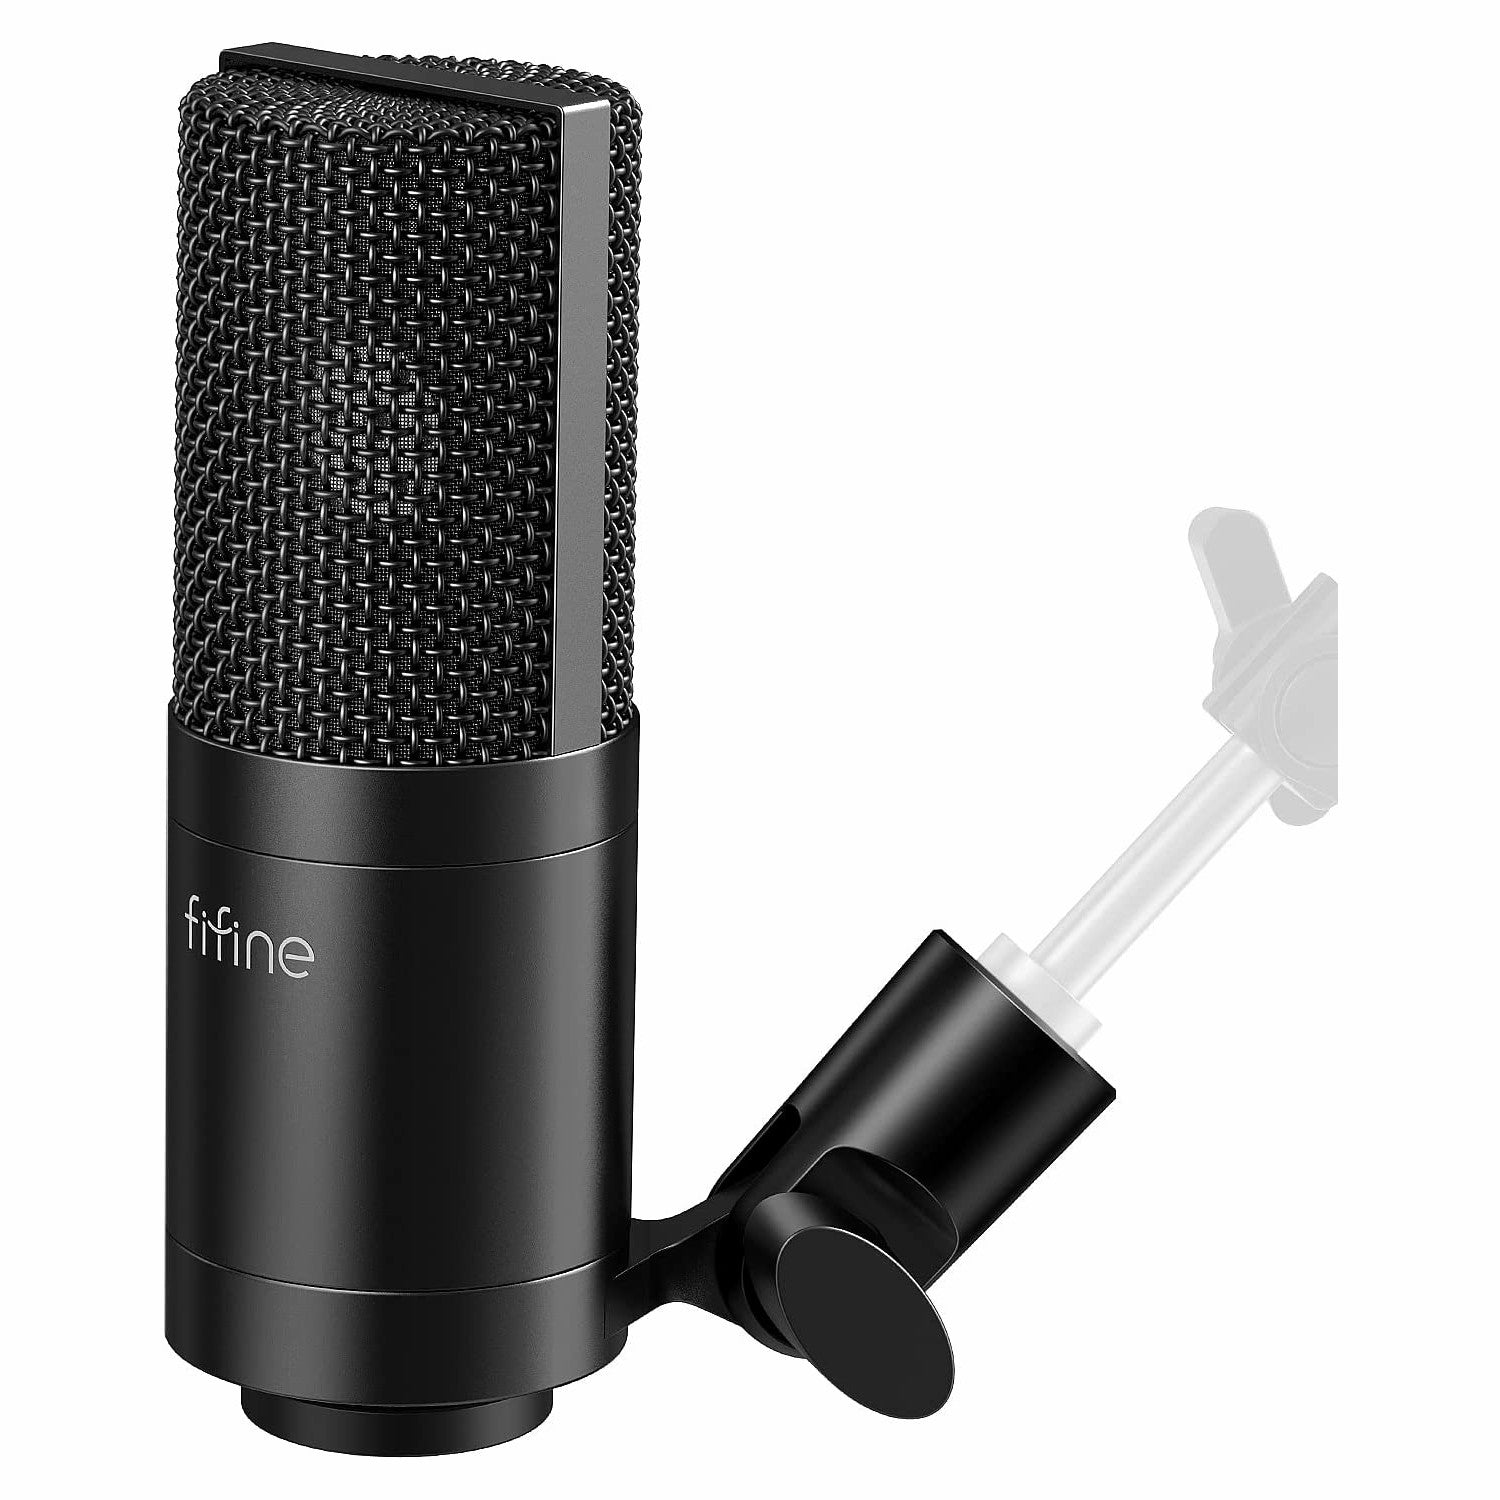 FIFINE K670/670B USB Mic with A Live Monitoring Jack for Streaming Podcasting On Mac/Windows, US / Black